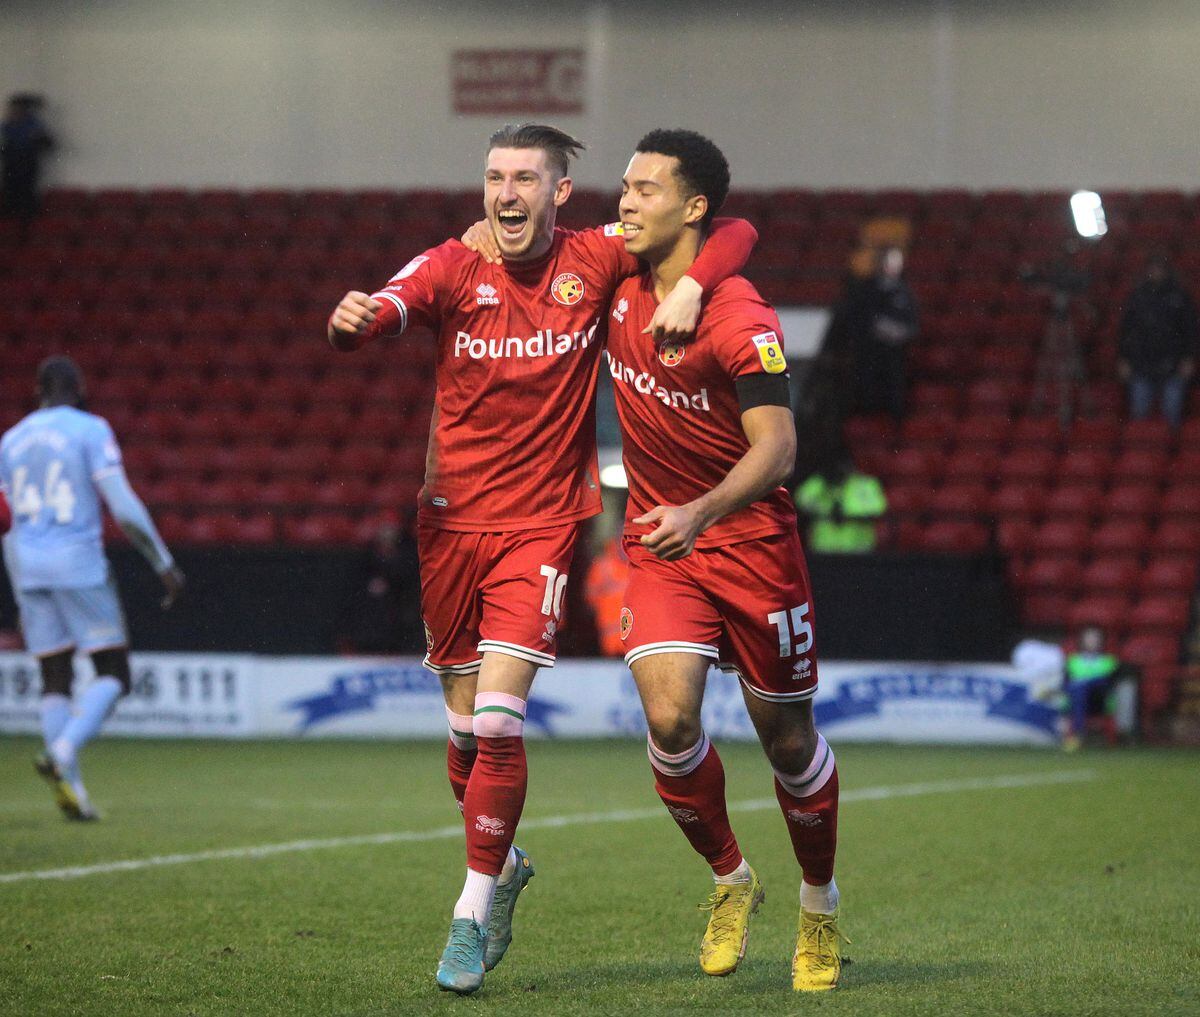 Walsall v Mansfield. Douglas James-Taylor  (R) celebrates his goal with Tom Knowles.